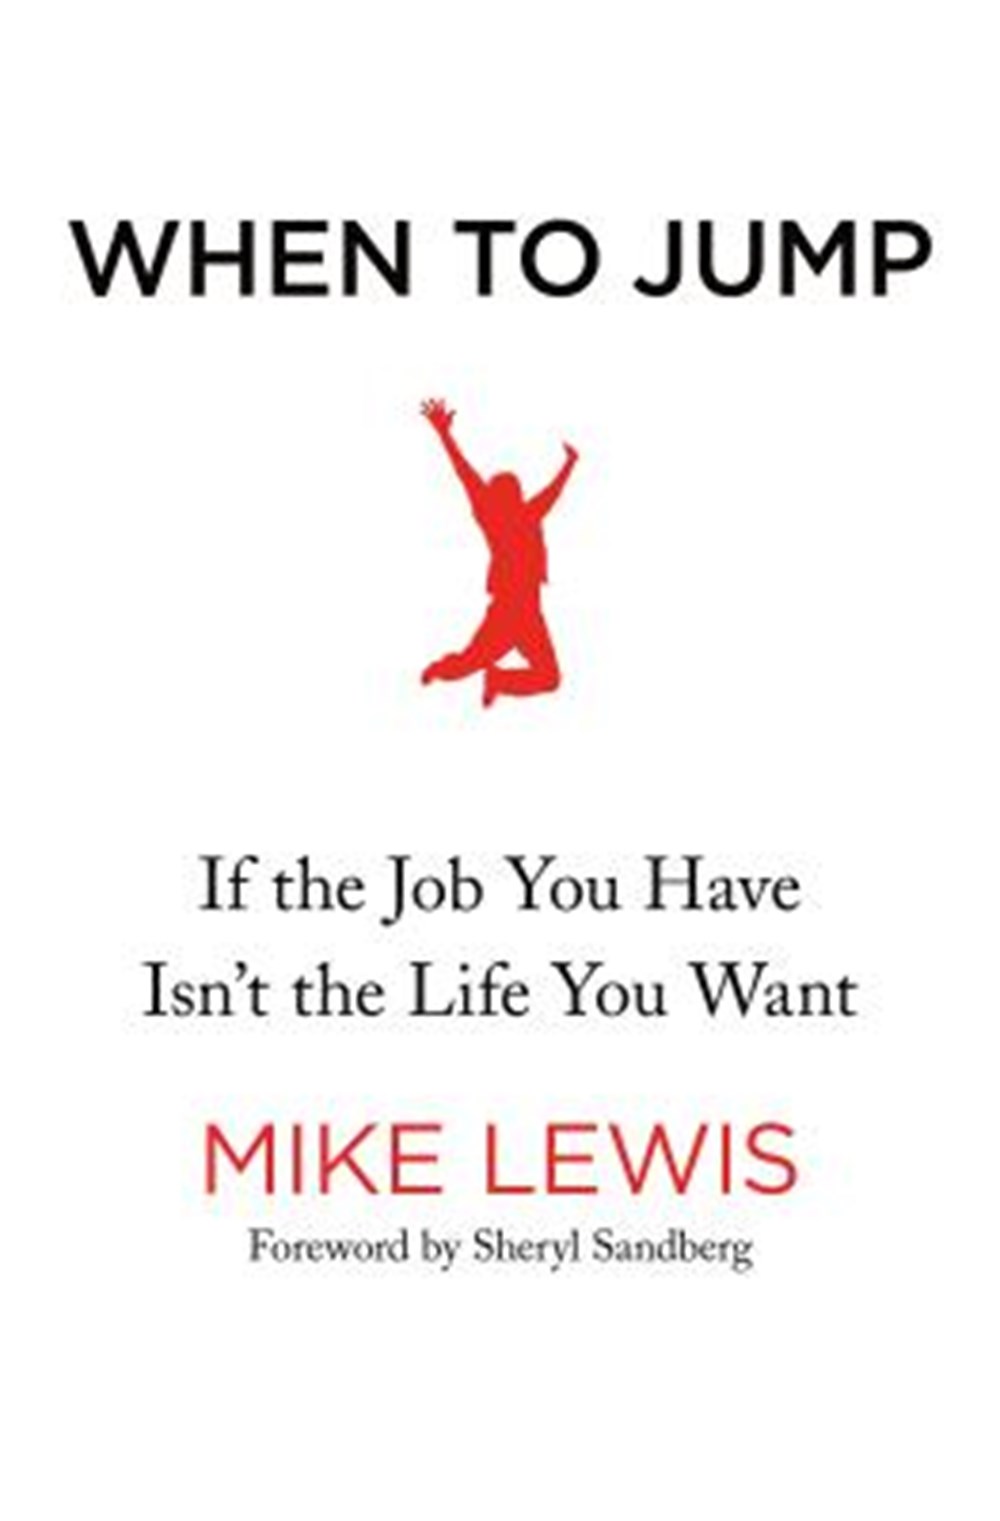 When to Jump If the Job You Have Isn't the Life You Want